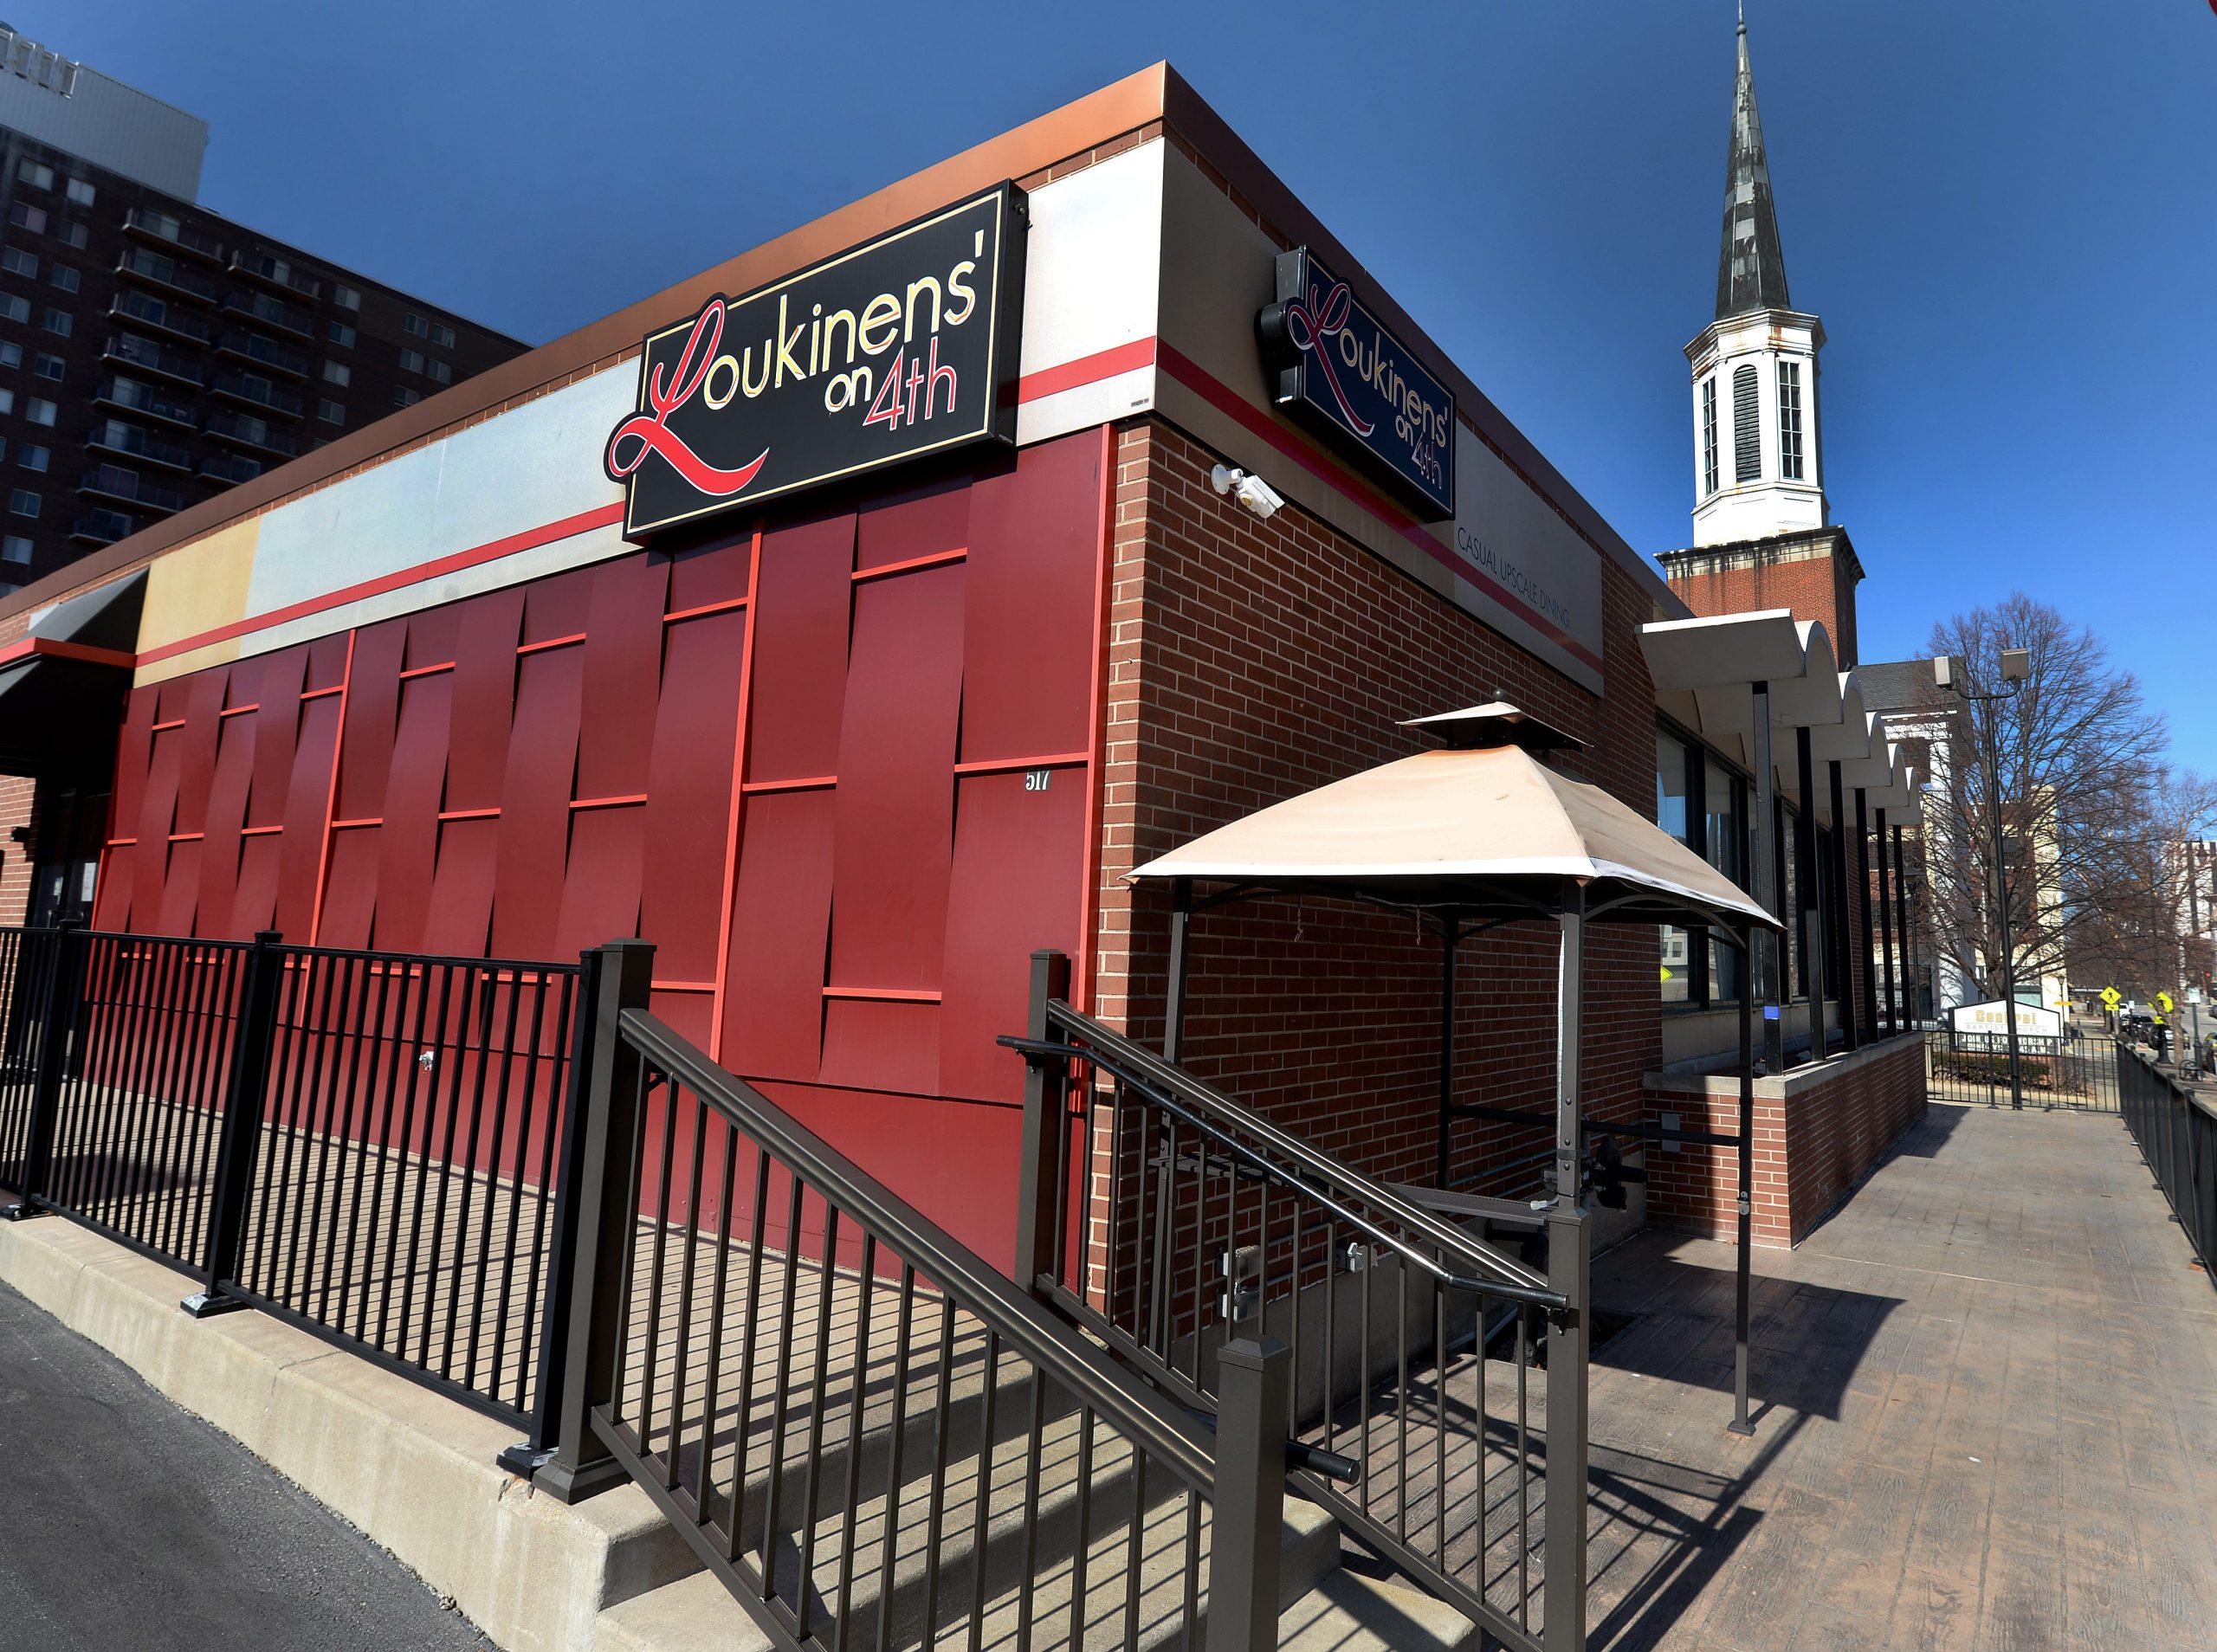 Loukinens' on 4th Closure and Real Estate Listing: What's Next for the Springfield Dining Spot? - Archyde